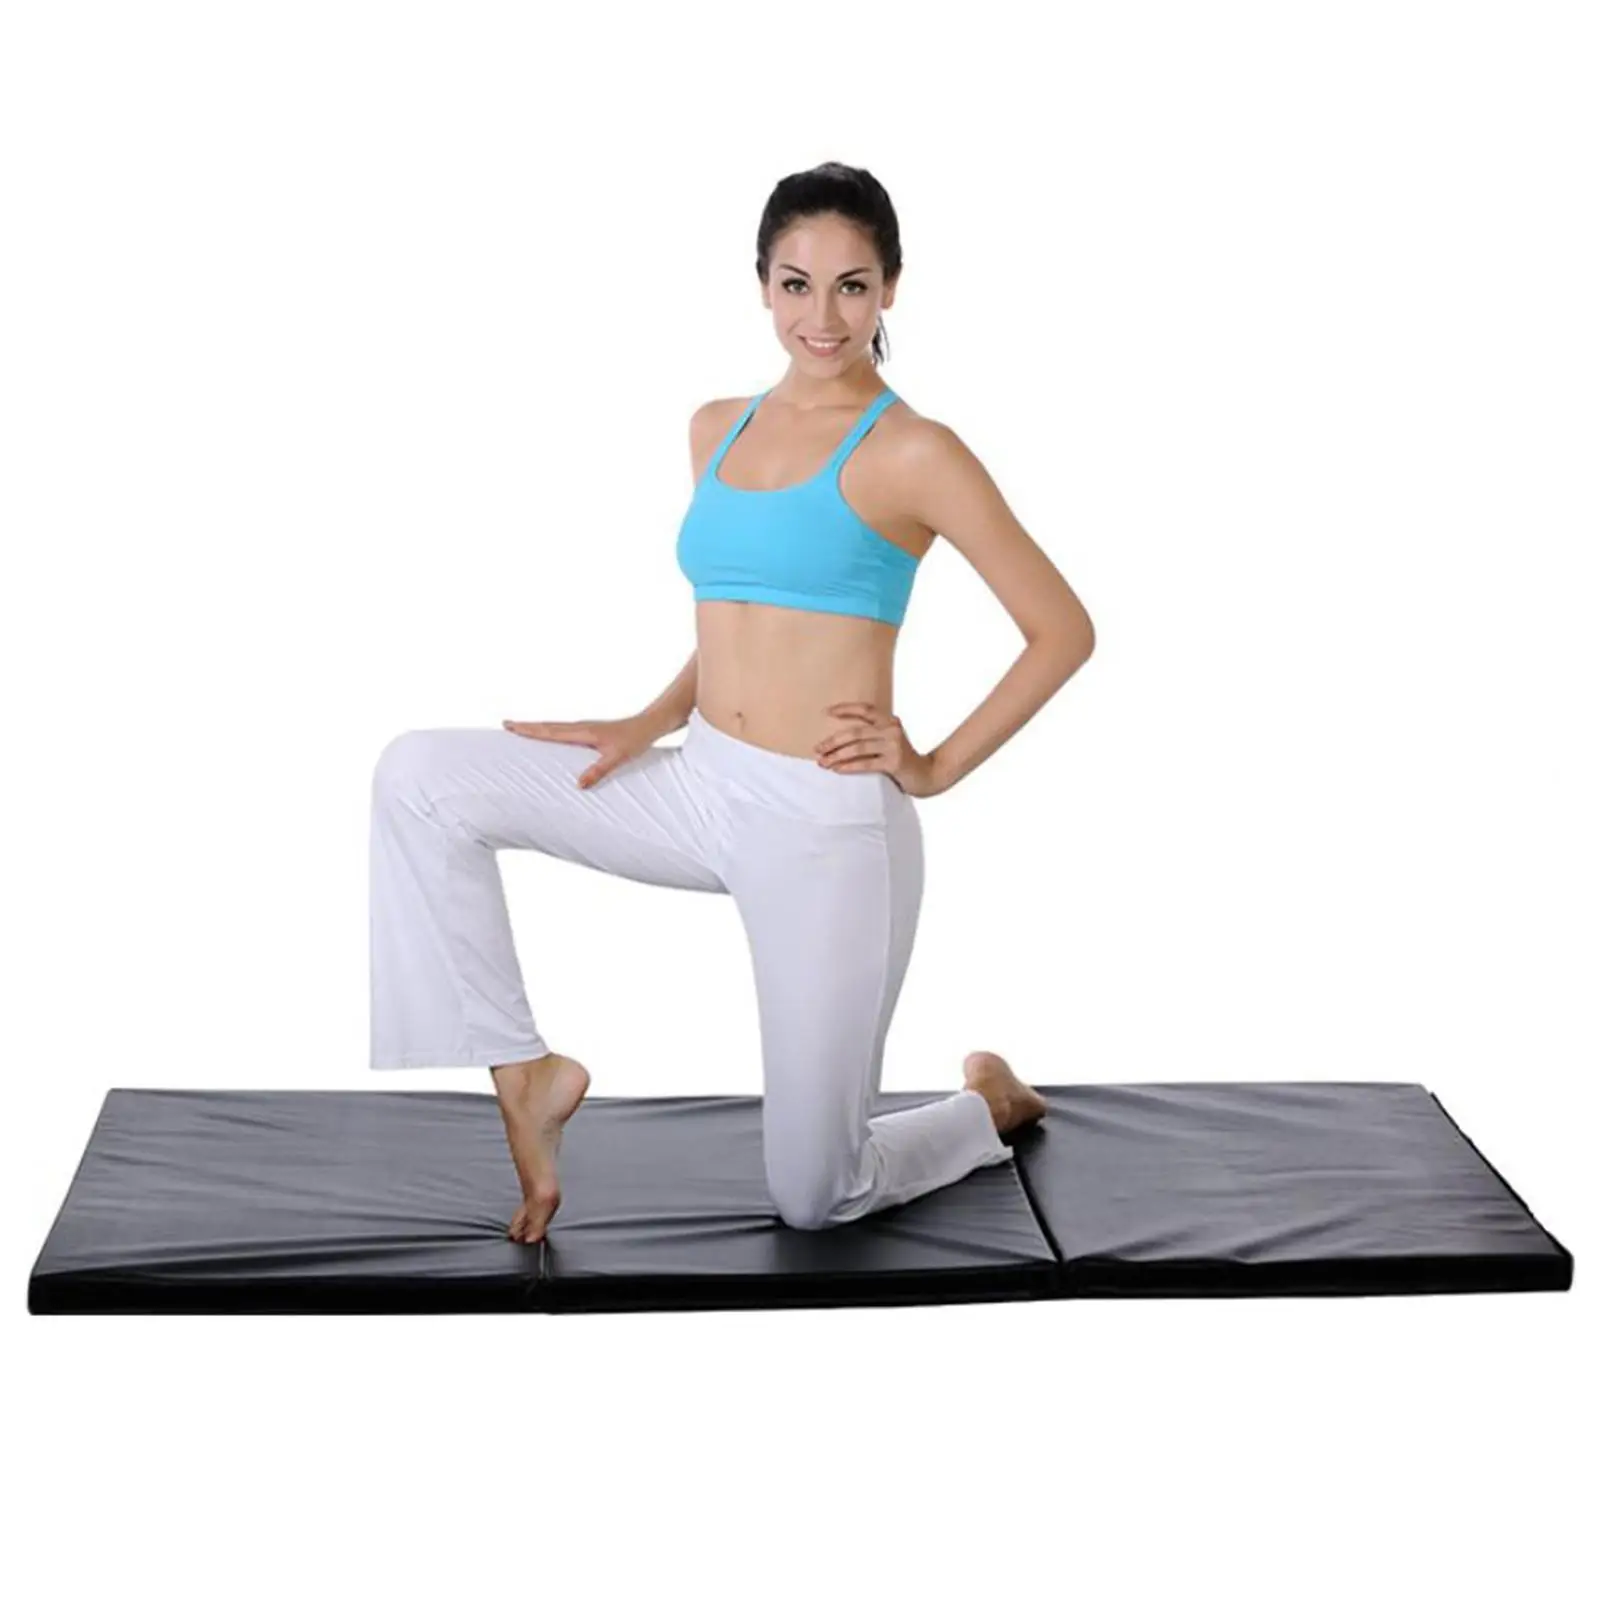  Folding Exercise  and  3 Panel with Carrying Handle Waterproof for Pilates, Stretching, Tumbling, Trainer, Core Workouts